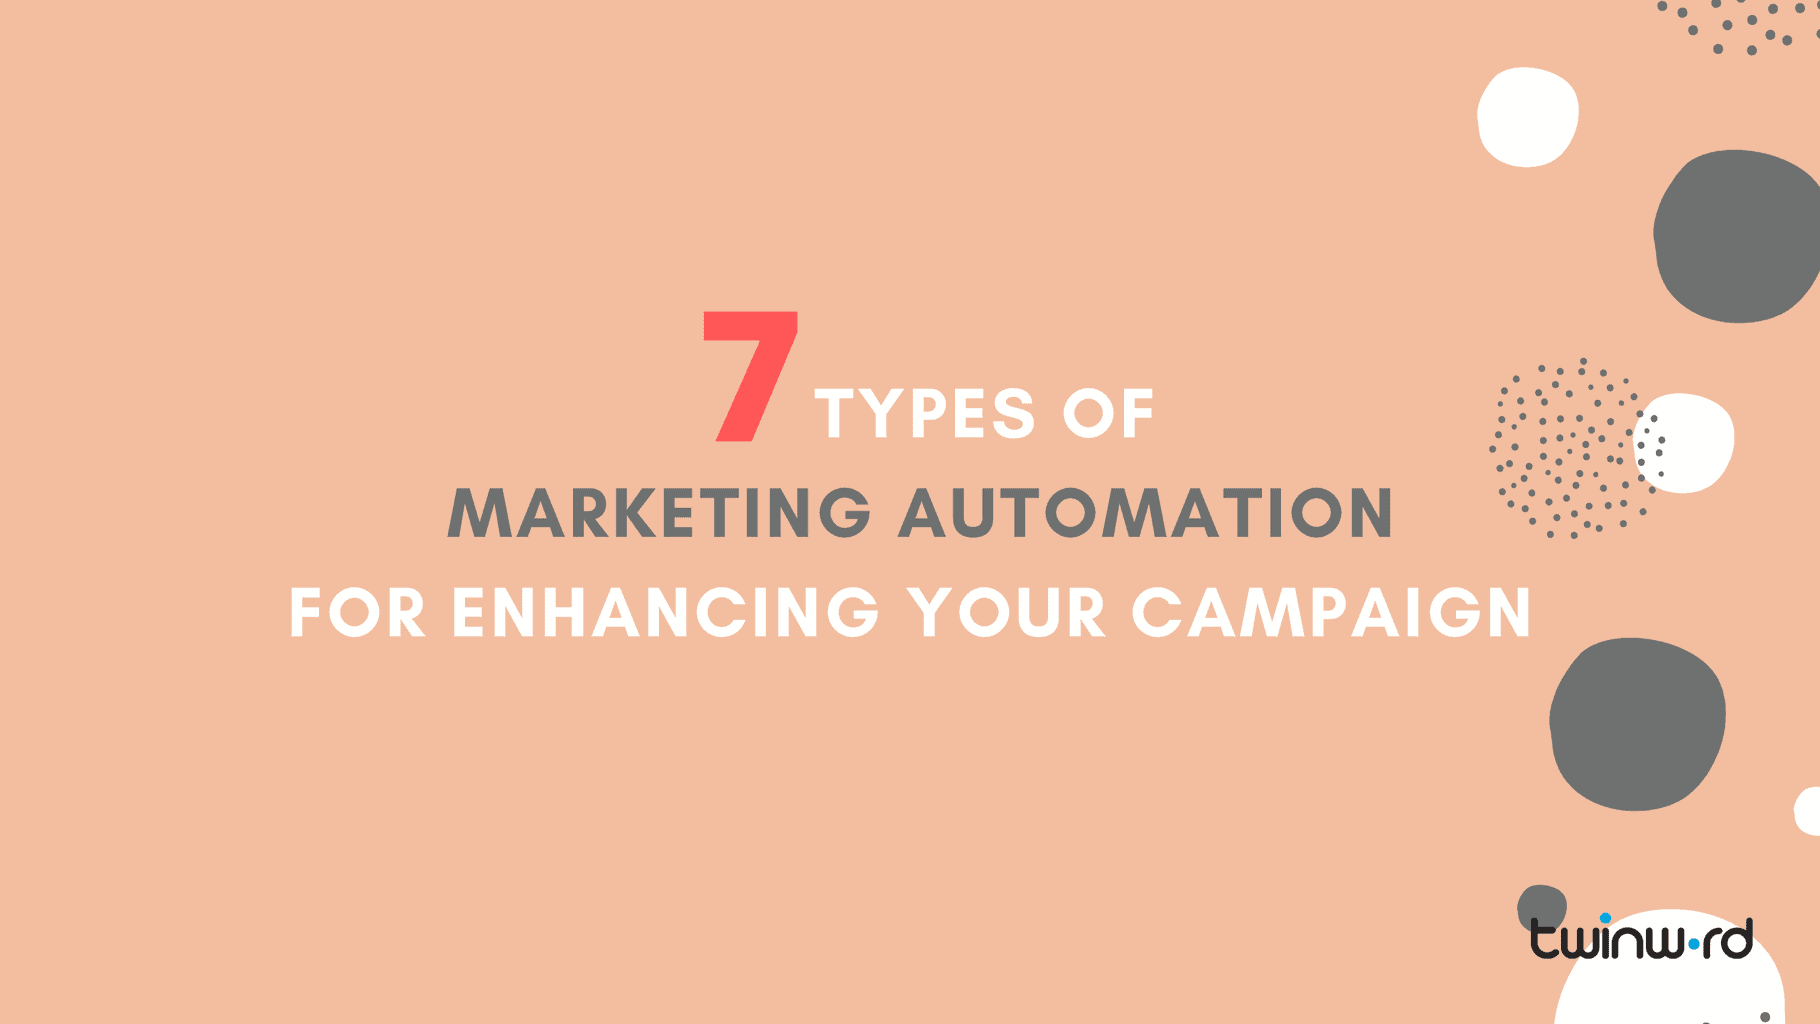 7 Types of Marketing Automation For Enhancing Your Campaign